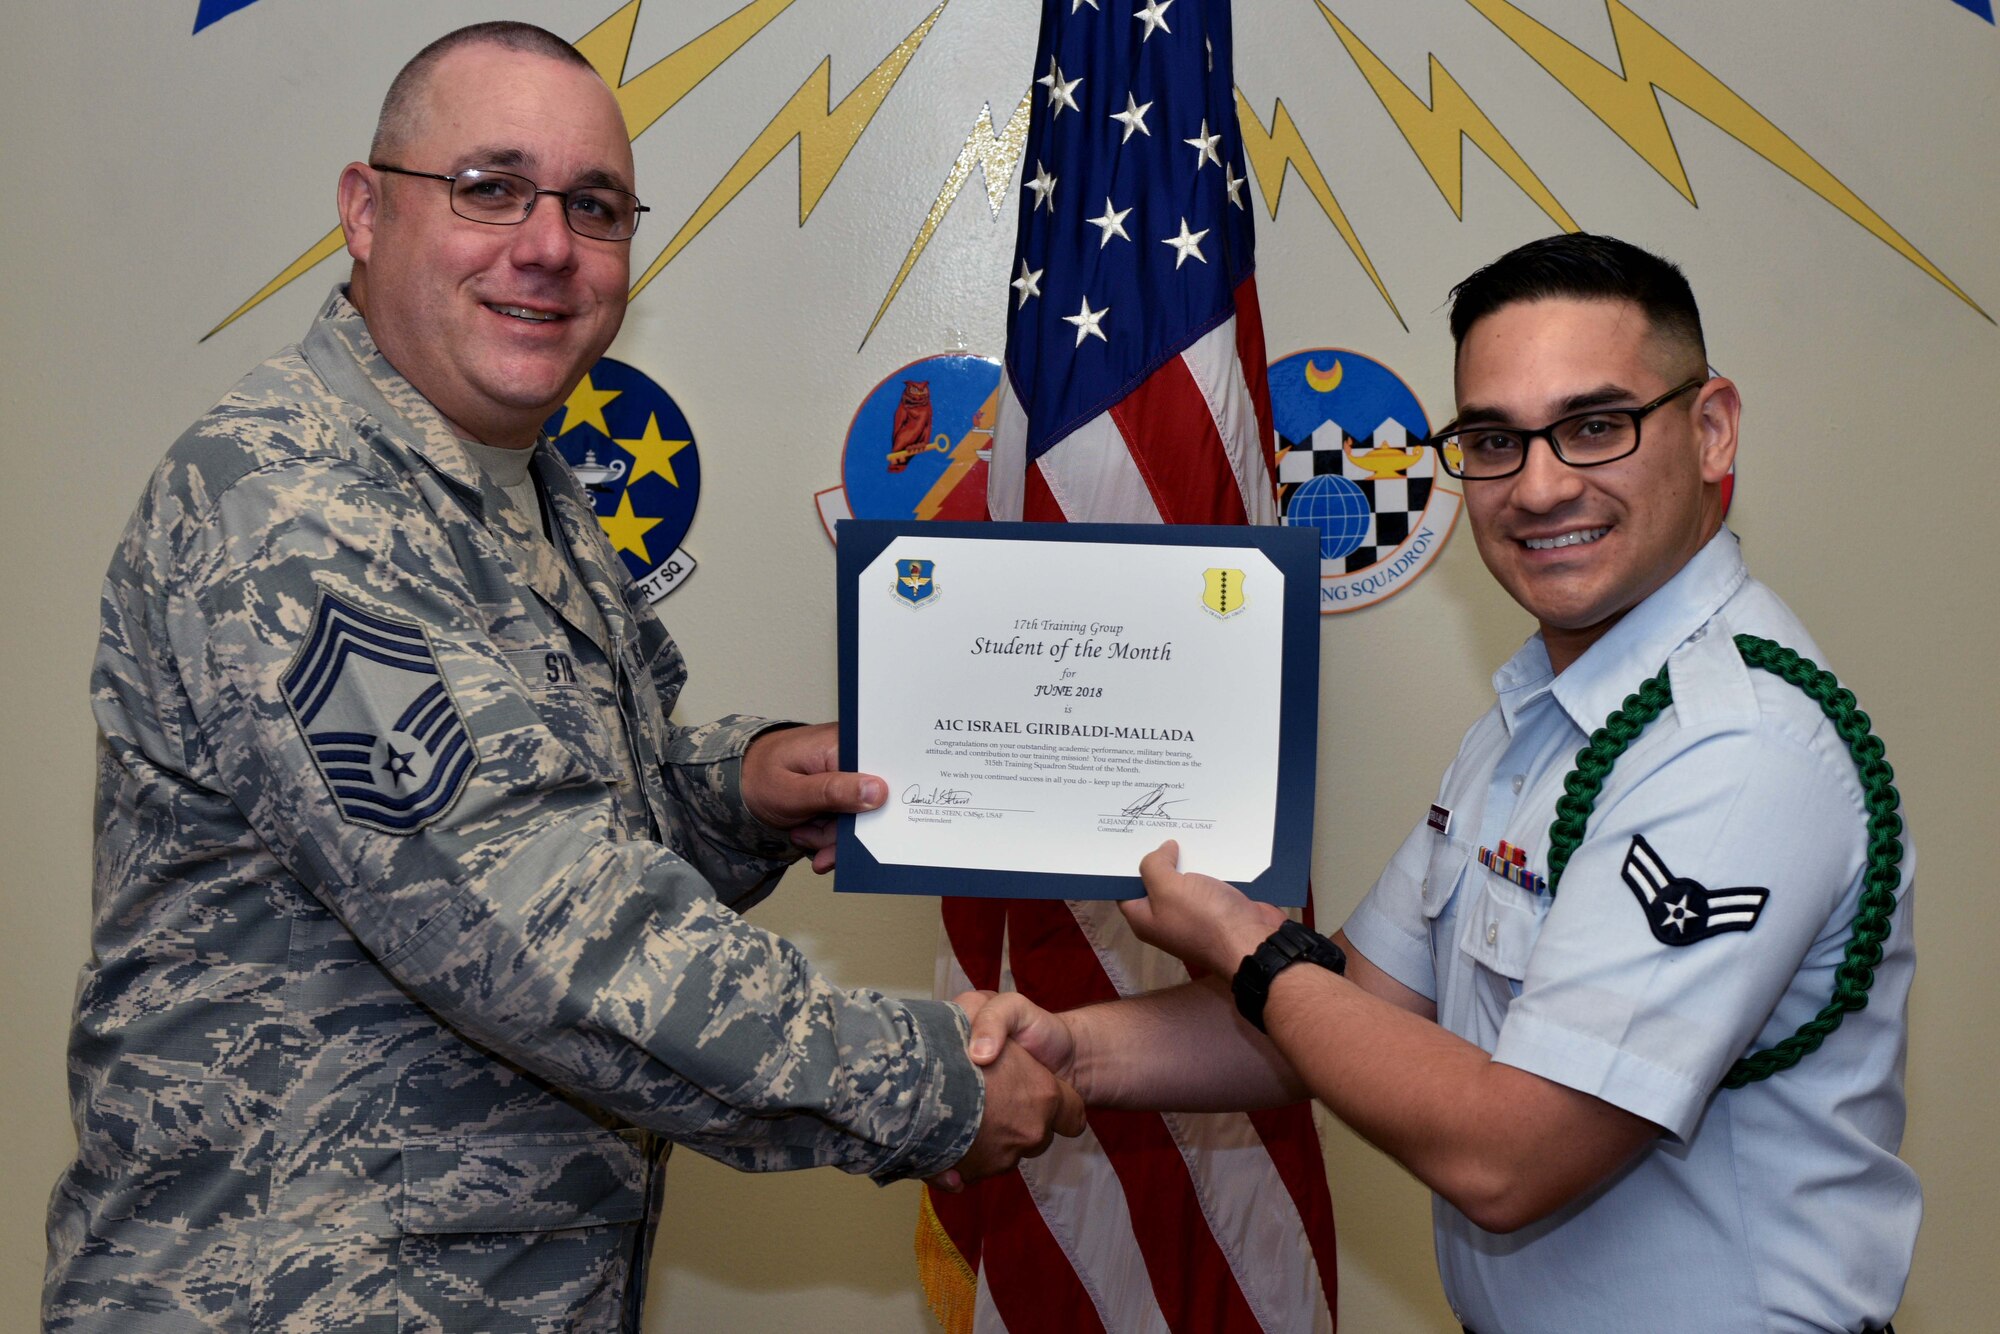 U.S. Air Force Chief Master Sgt. Daniel Stein, 17th Training Group superintendent, presents the 315th Training Squadron Student of the Month award to Airman 1st Class Israel Giribaldi-Mallada, 316th TRS trainee, at Brandenburg Hall on Goodfellow Air Force Base, Texas, July 6, 2018. The 315th TRS’s vision is to develop combat-ready intelligence, surveillance and reconnaissance professionals and promote an innovative squadron culture and identity unmatched across the U.S. Air Force. (U.S. Air Force photo by Senior Airman Randall Moose/Released)